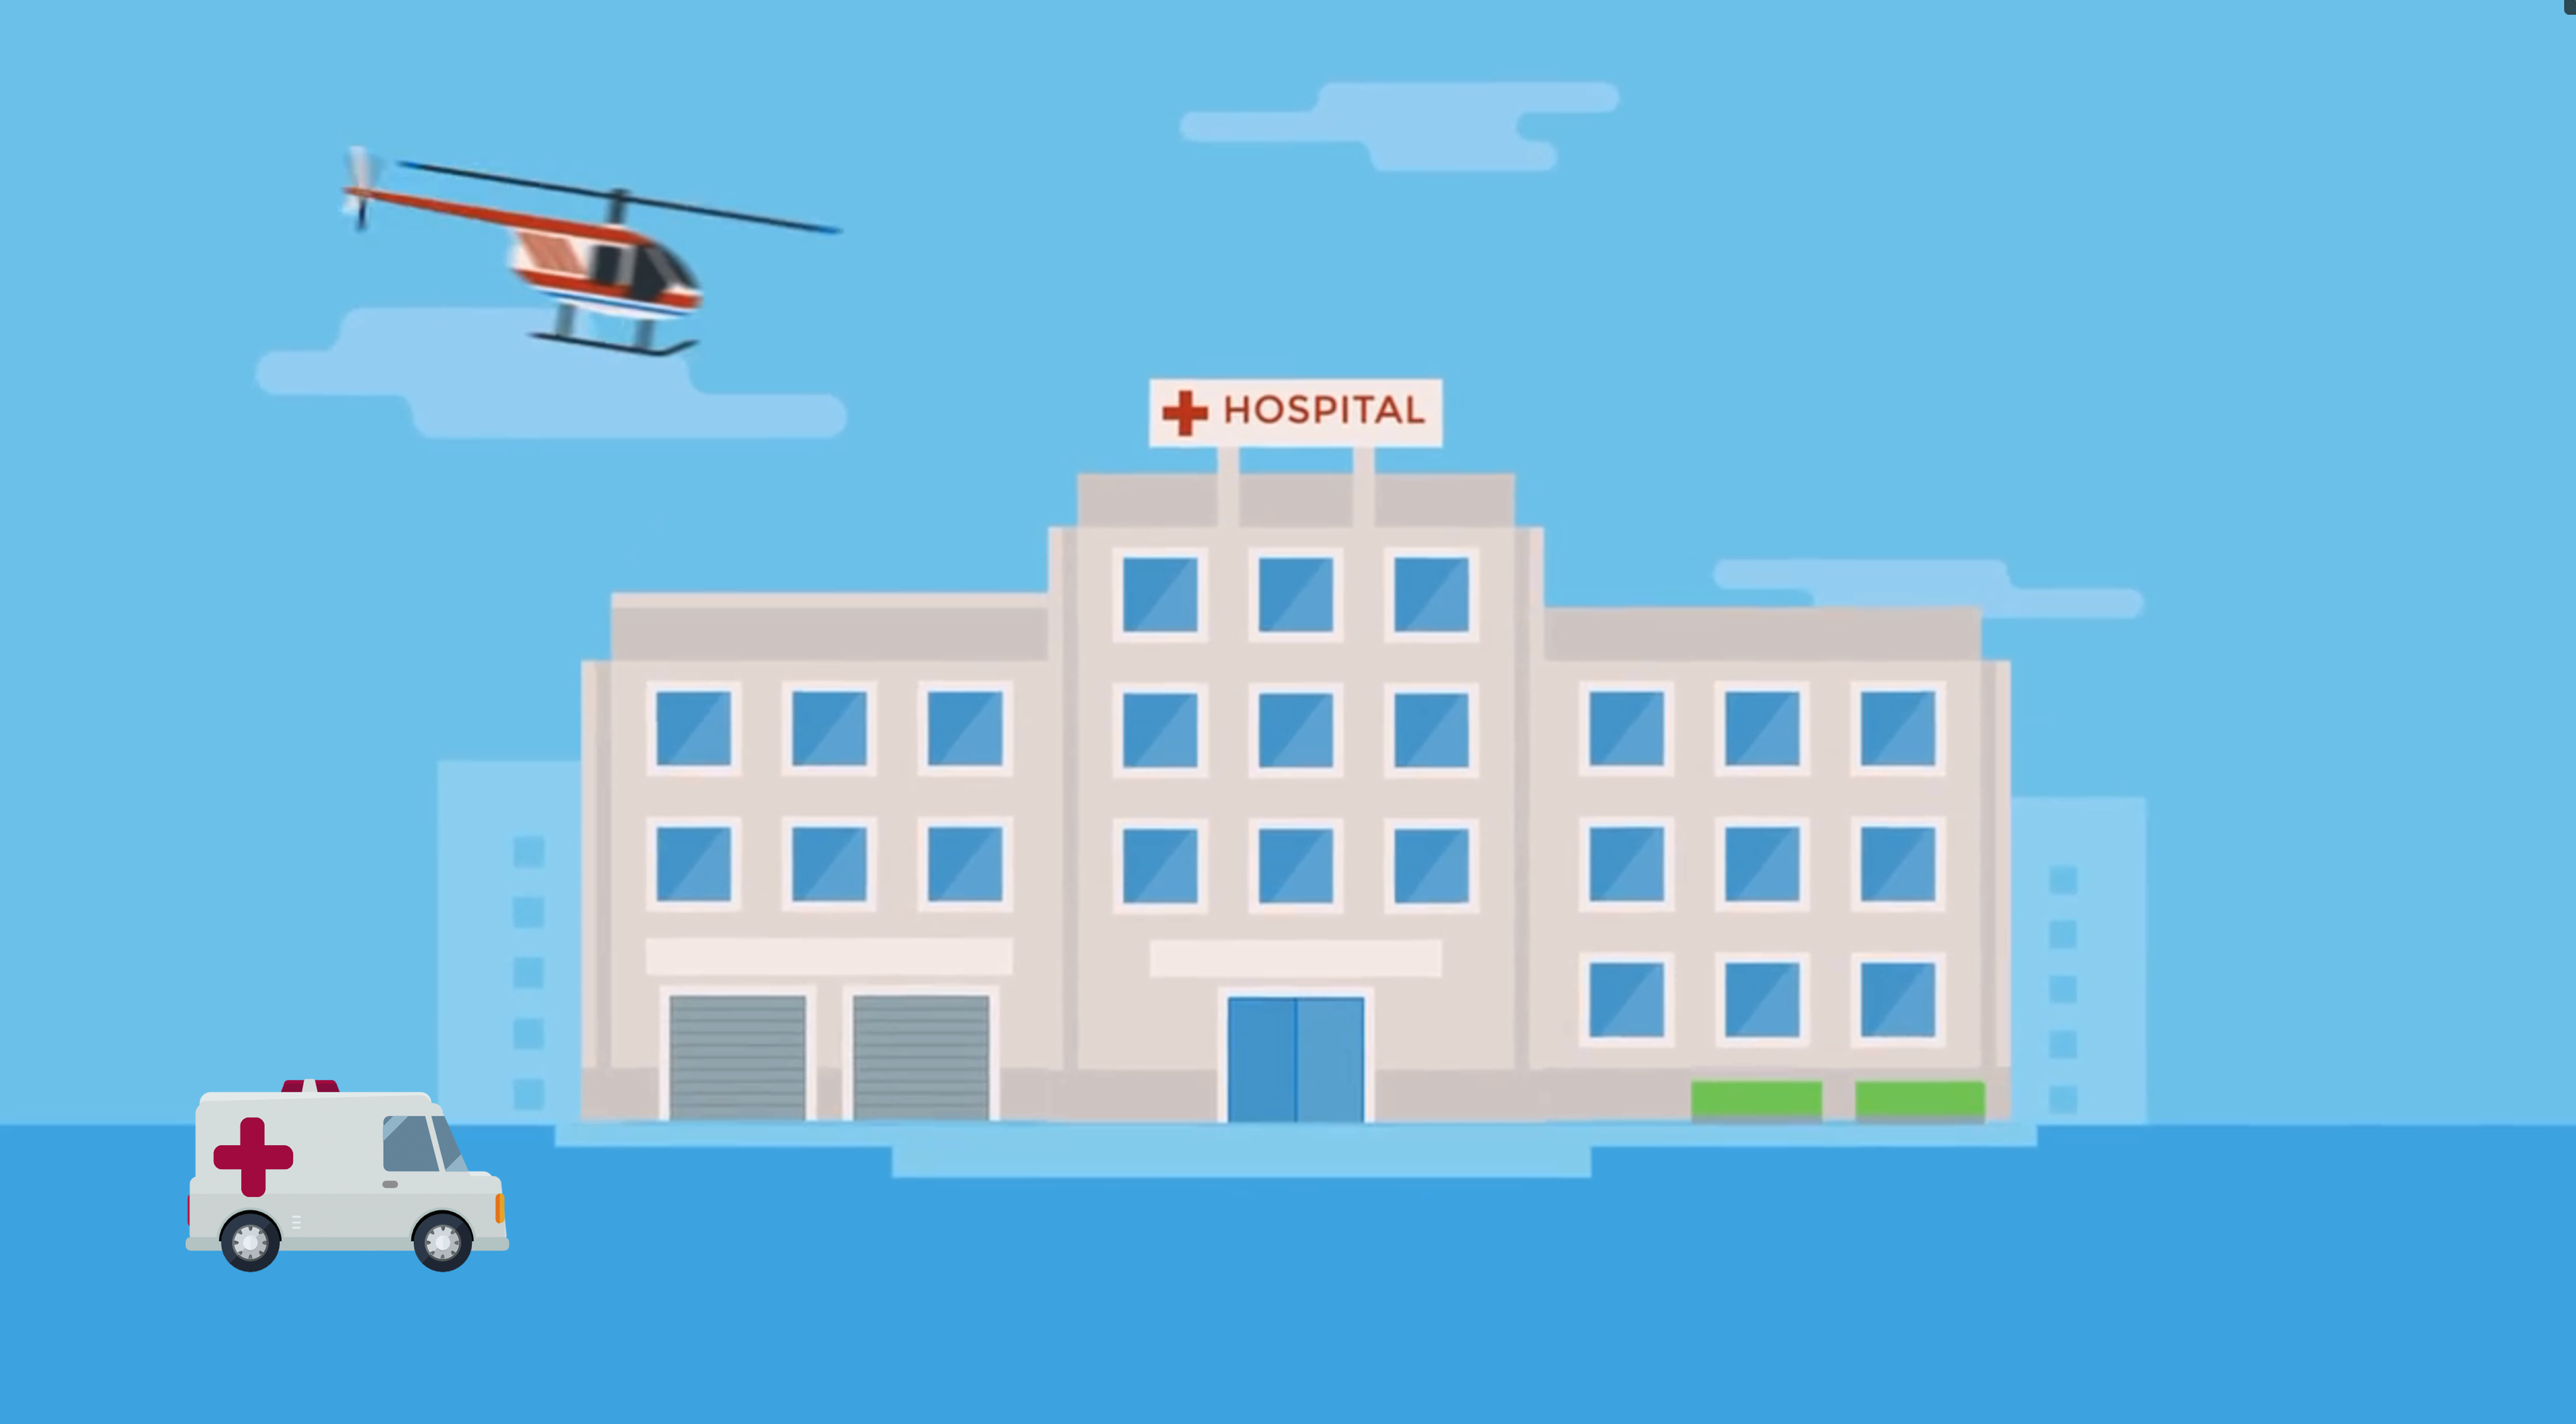 Hospital and Helicopter